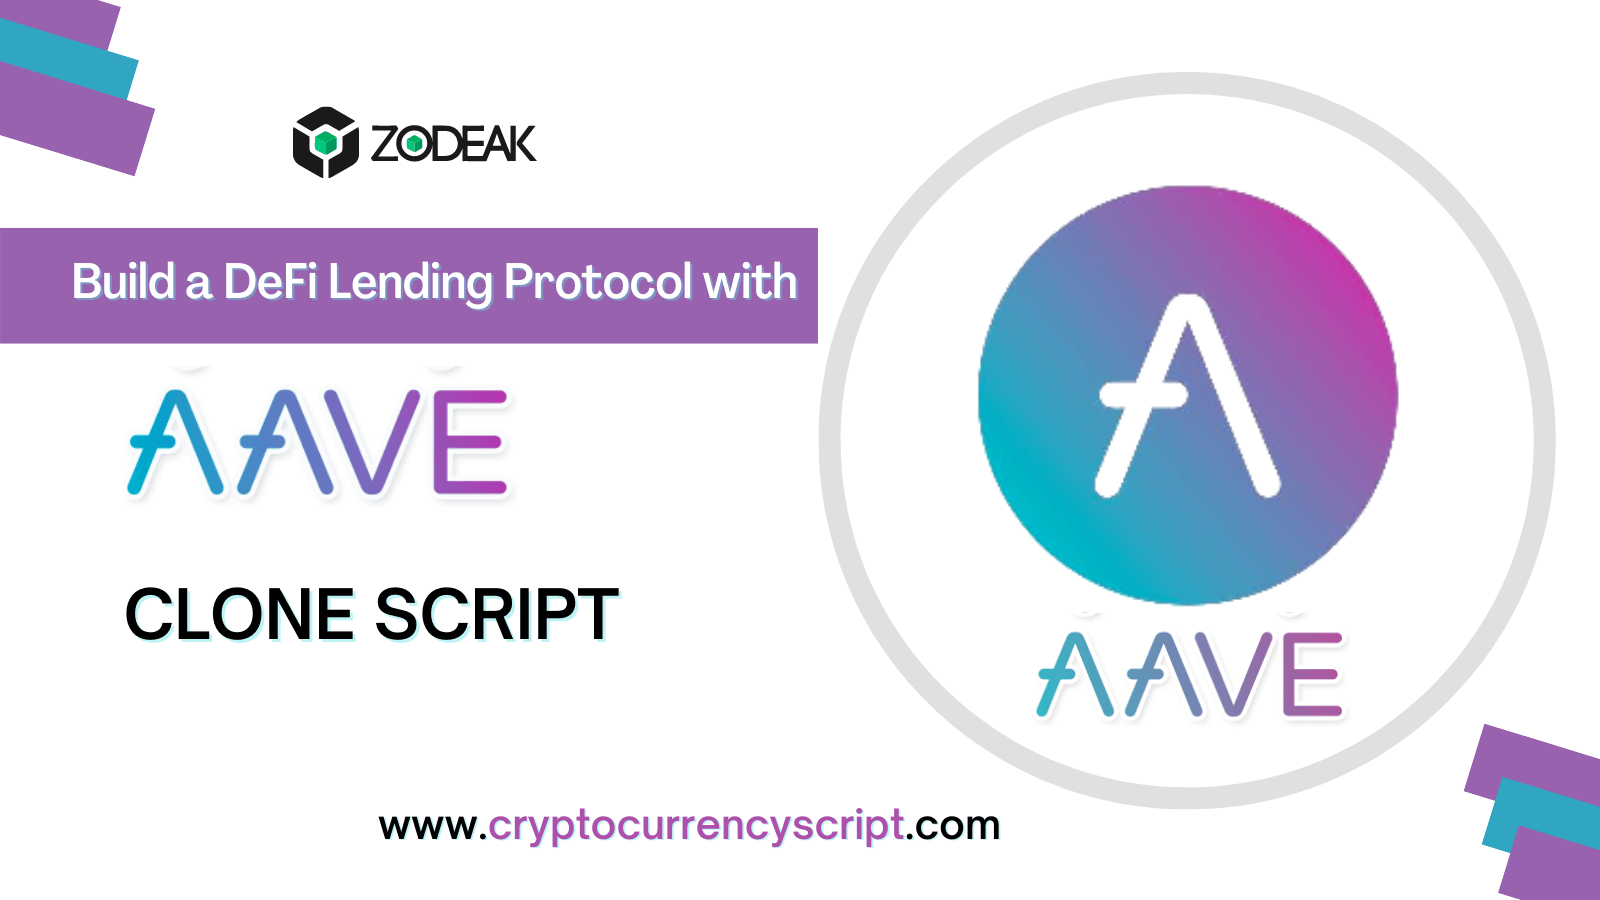 AAVE Clone Script – To Build a DeFi Lending Protocol Like AAVE!